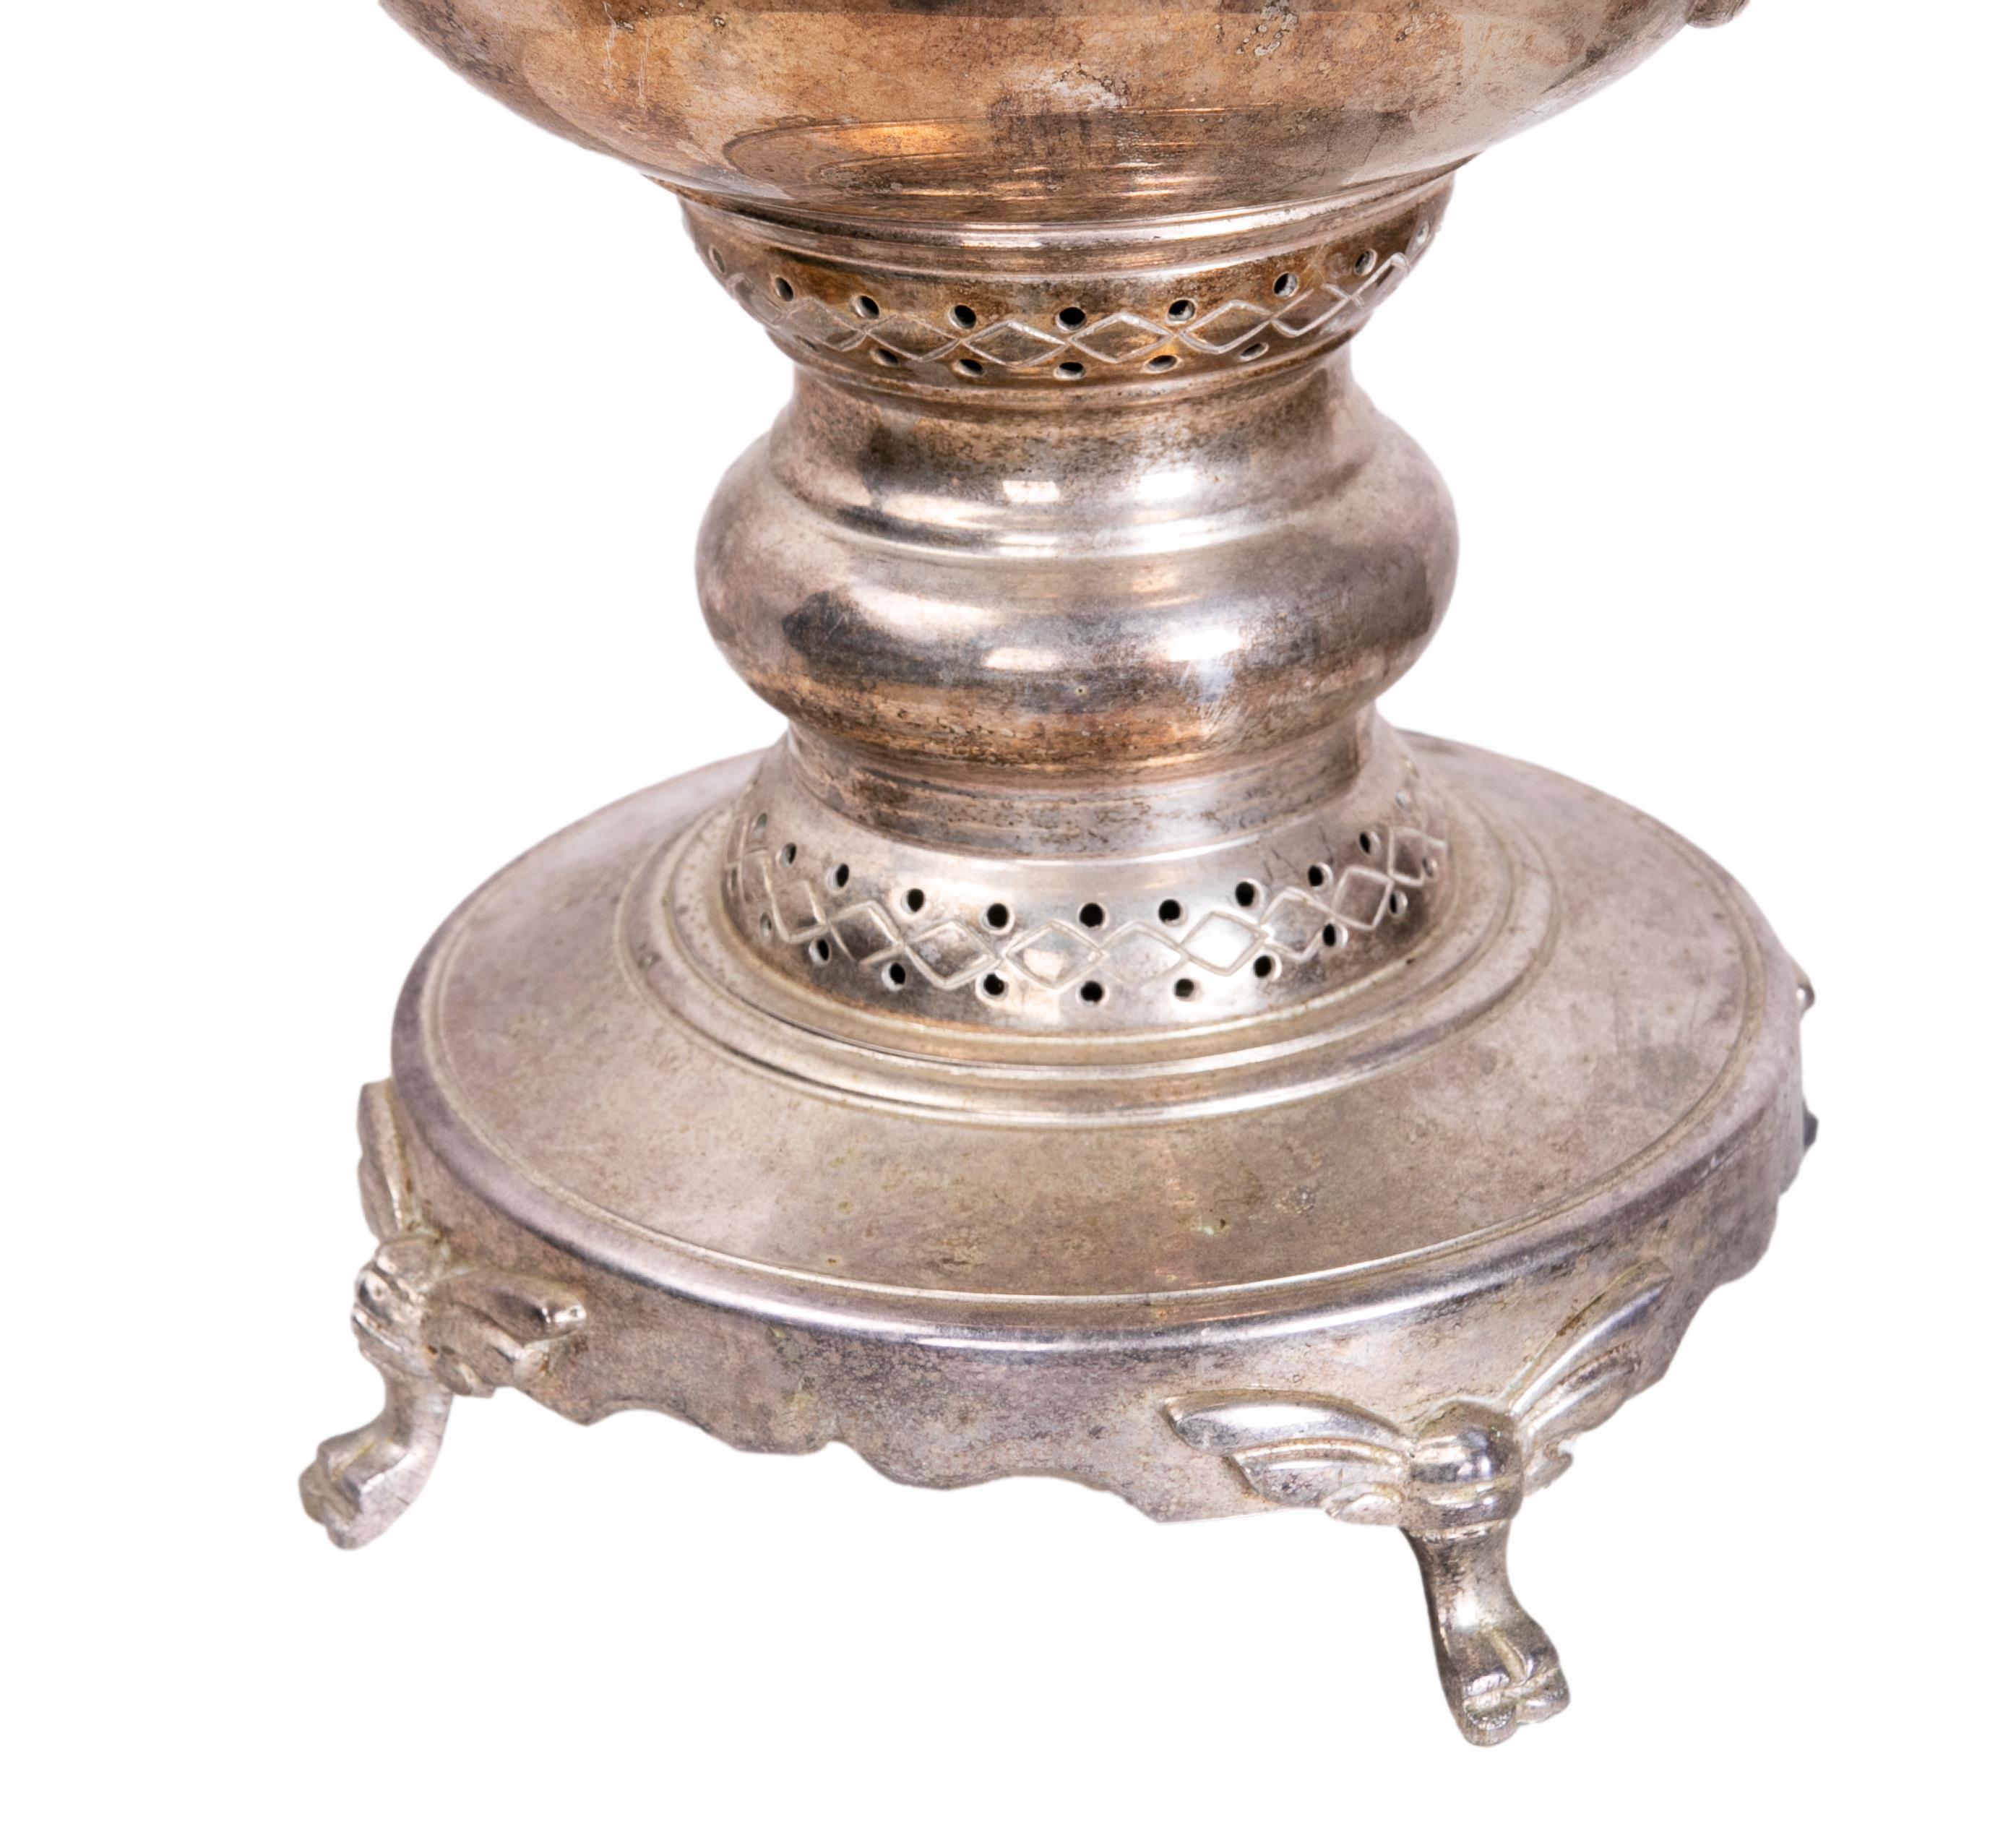 1980s Moroccan Silver-Plated Metal Samovar with Wooden Handles 3